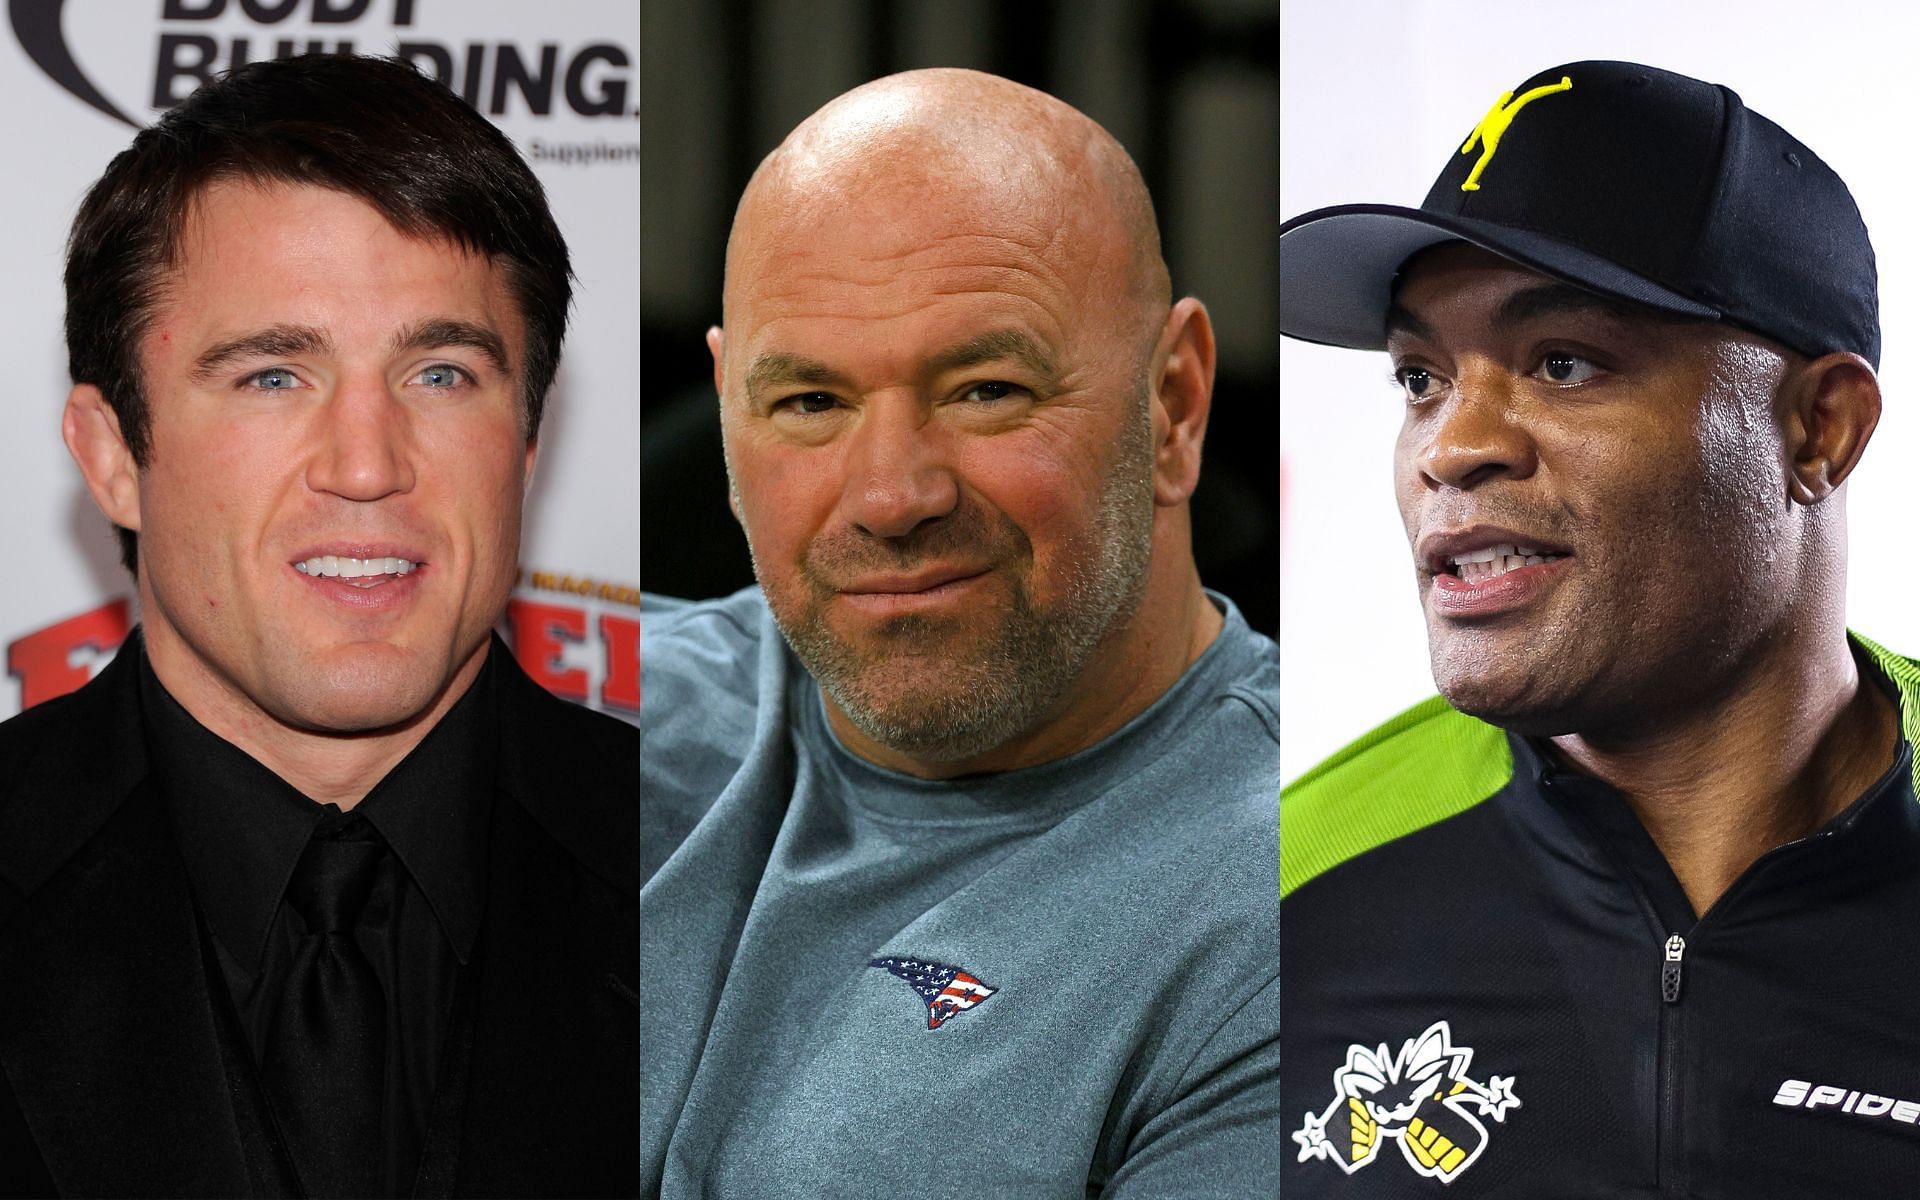 Chael Sonnen (Left), Dana White (Middle), and Anderson Silva (Right)